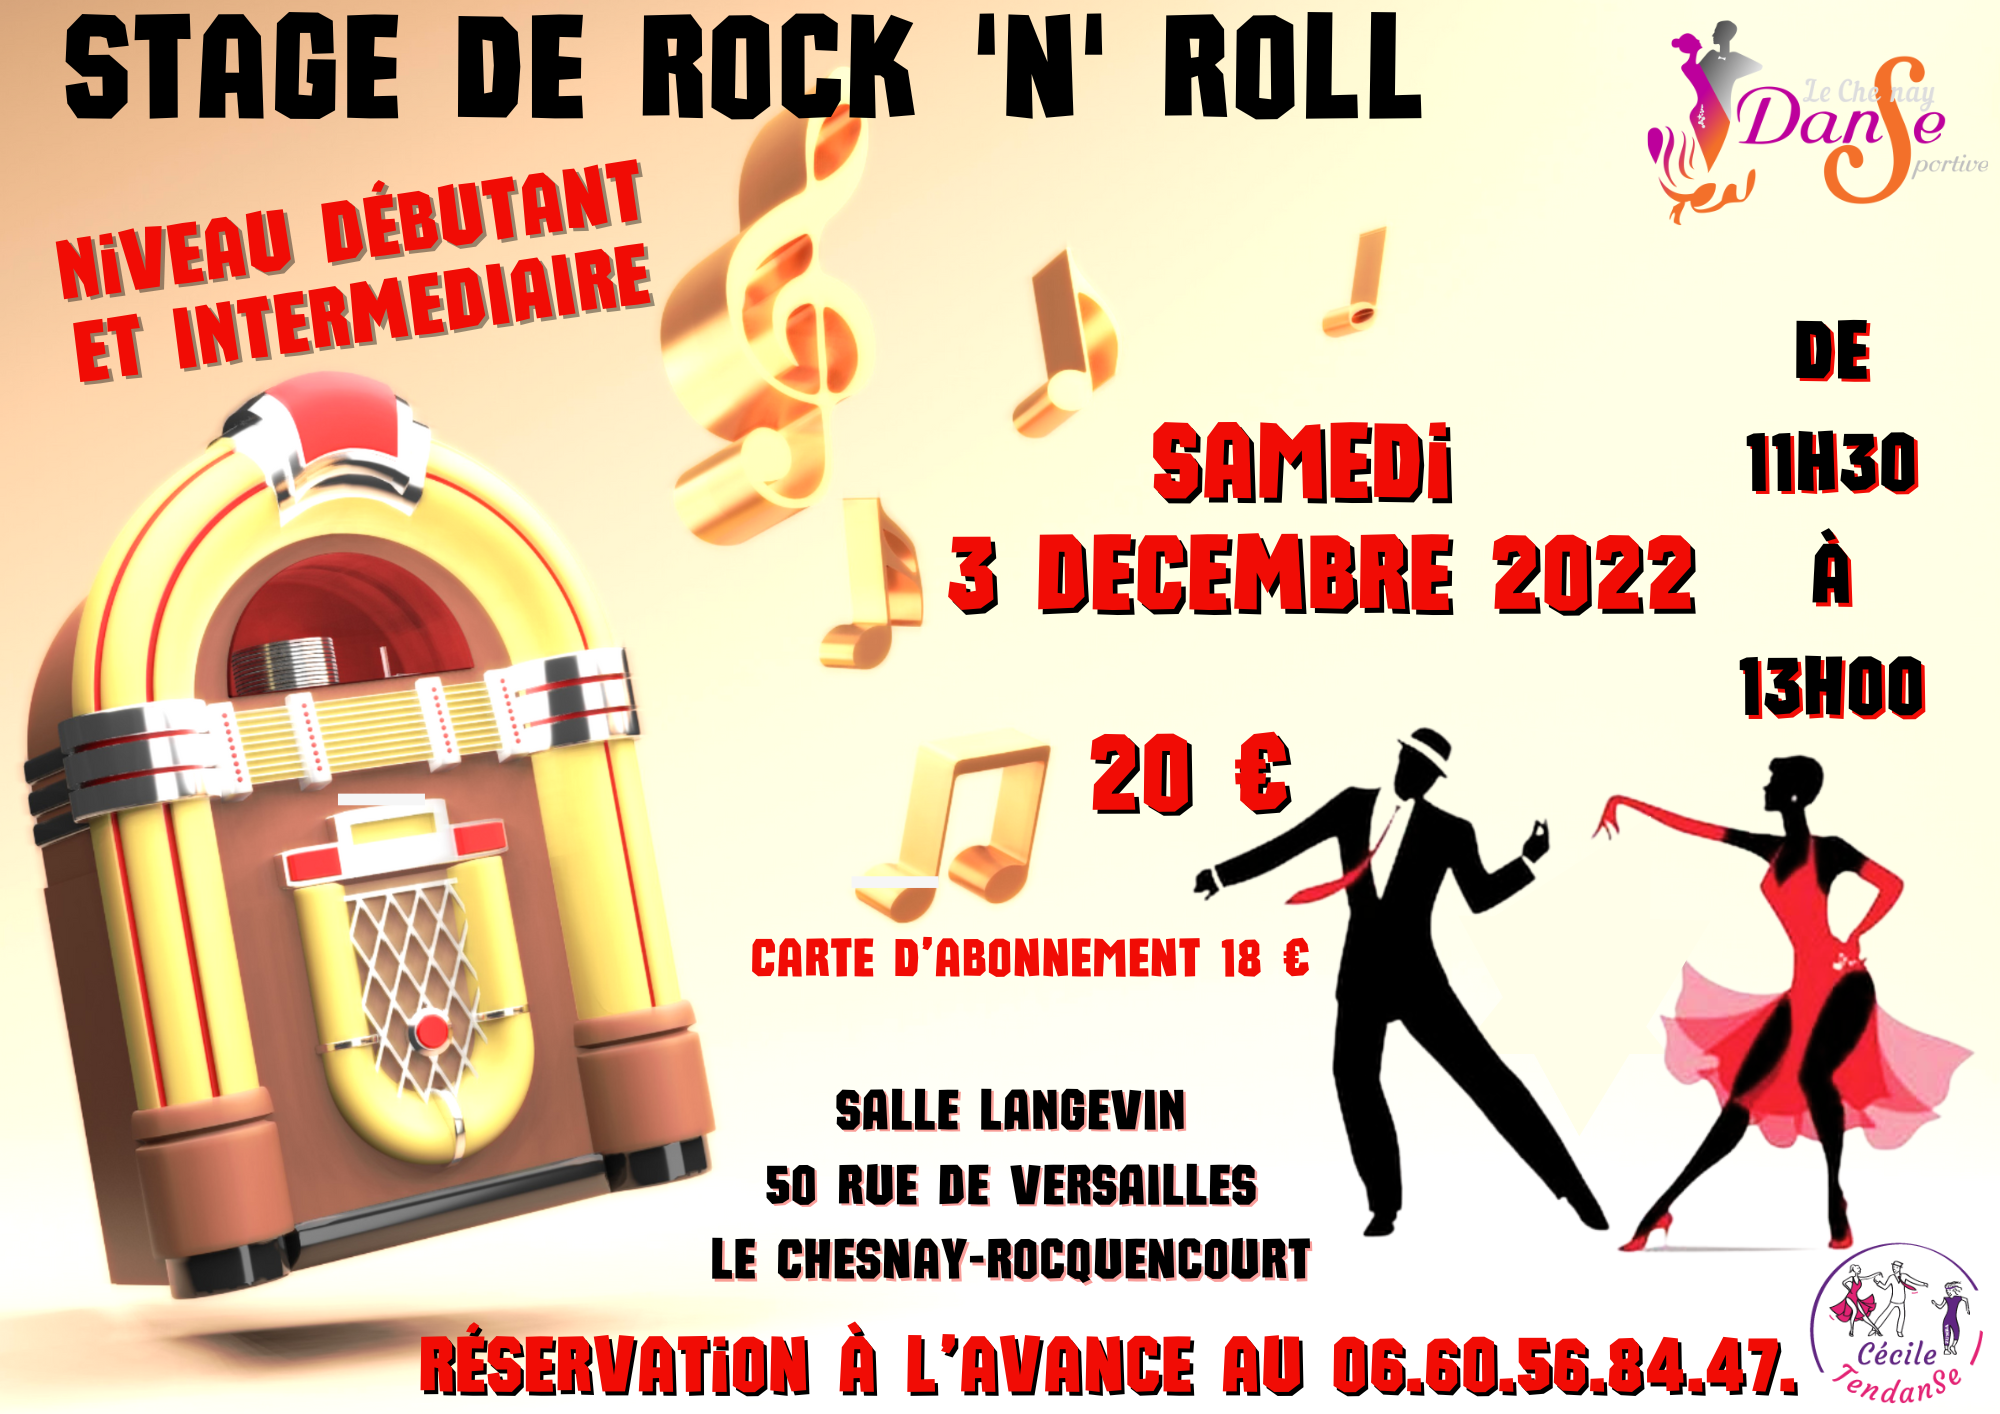 You are currently viewing ROCK NIVEAUX 1 & 2 – 3 DÉCEMBRE 2022